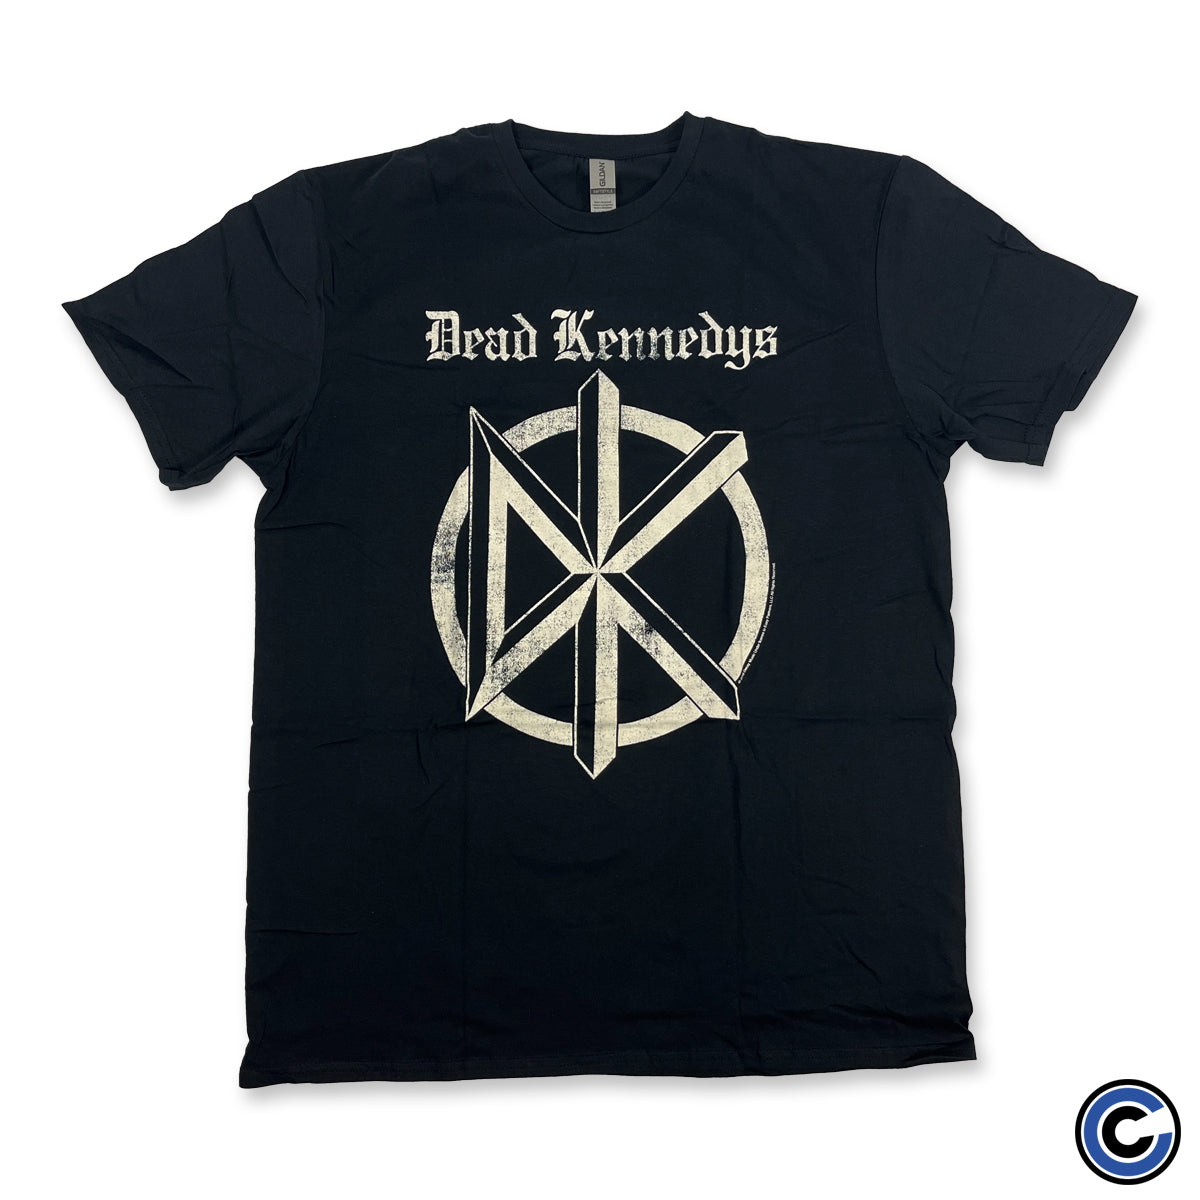 Dead Kennedys "Distressed Old English" Shirt